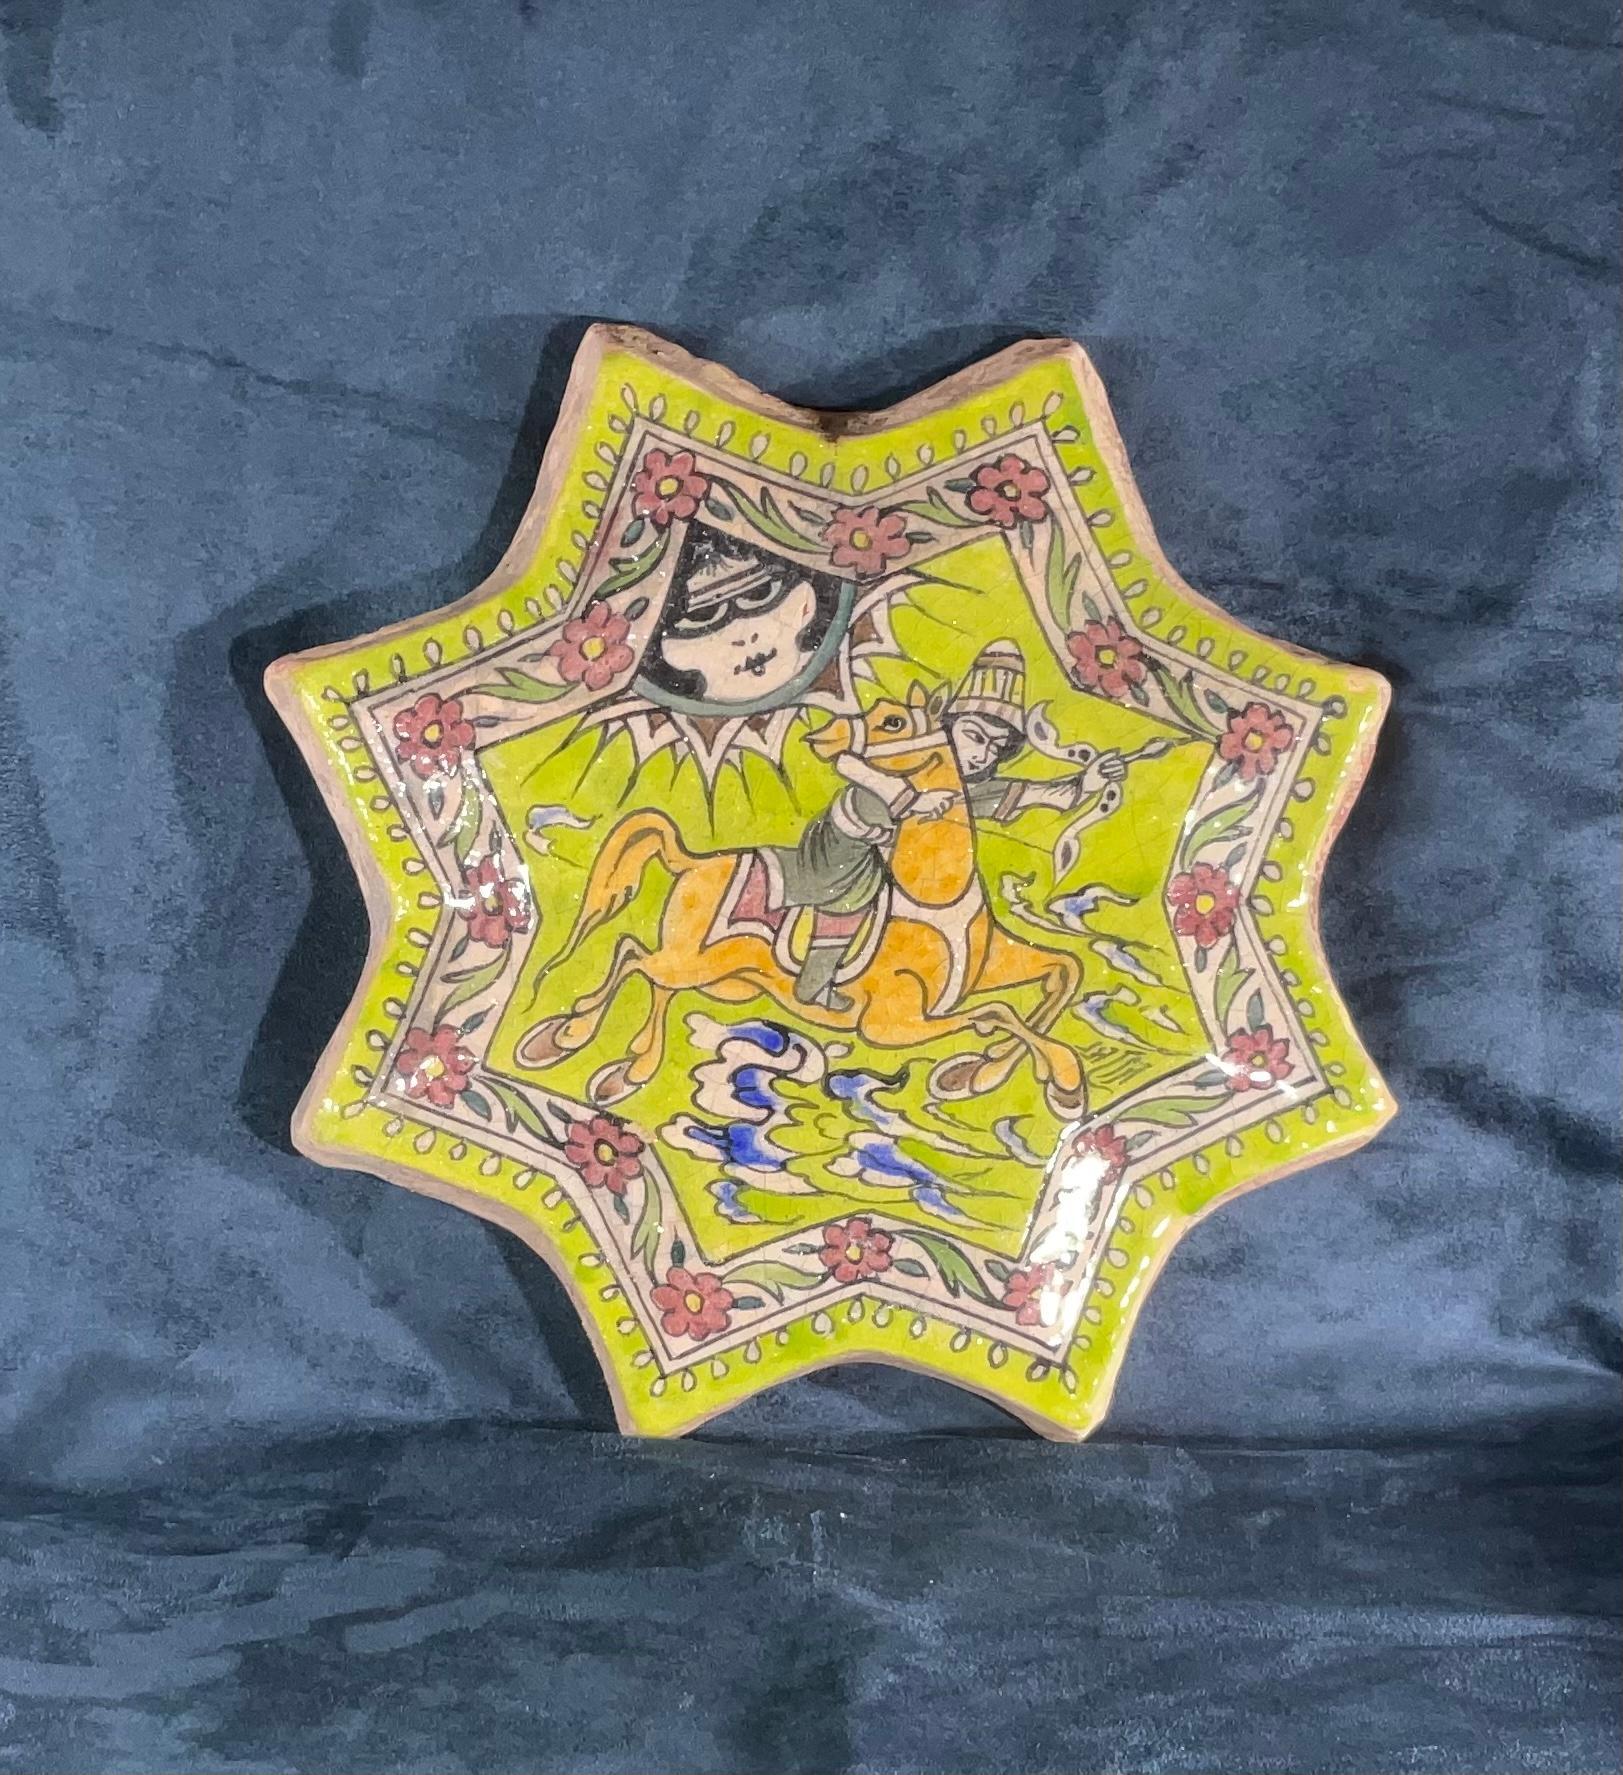 Exceptional ceramic wall hanging hand painted and glaze with colorful motif of warrior riding on a horse, surrounded with beautiful floral border.
Could hang on the wall.
The tile has minor age hairline crack that was professionally addressed and